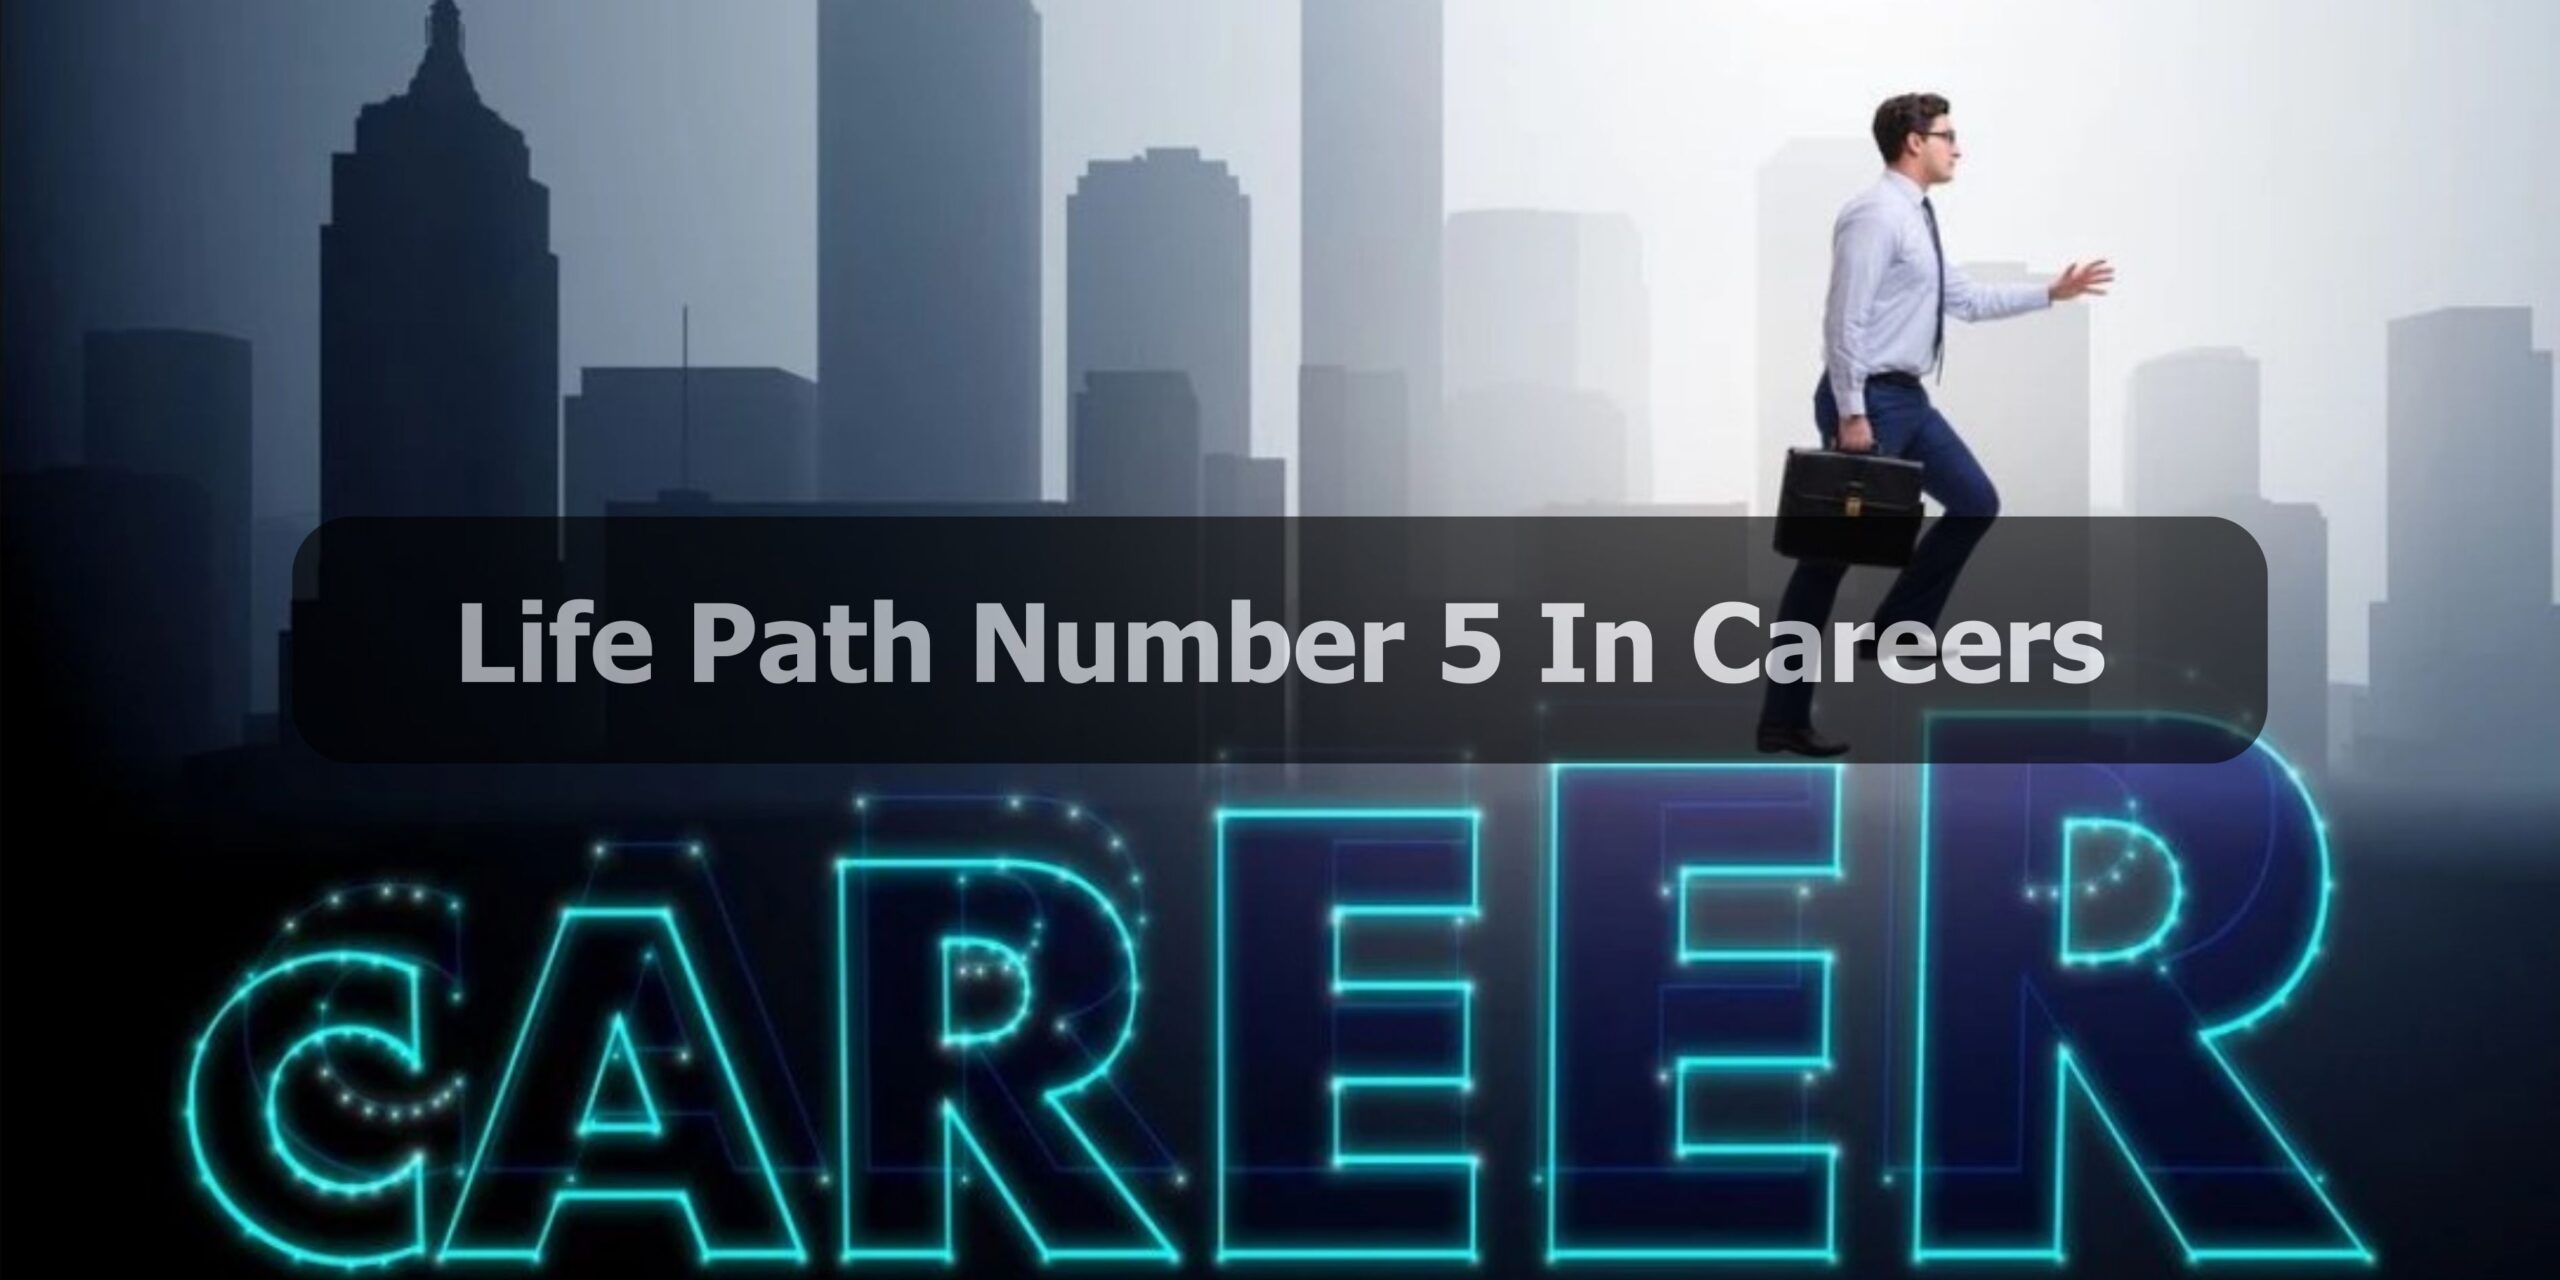 Life Path Number 5 In Careers